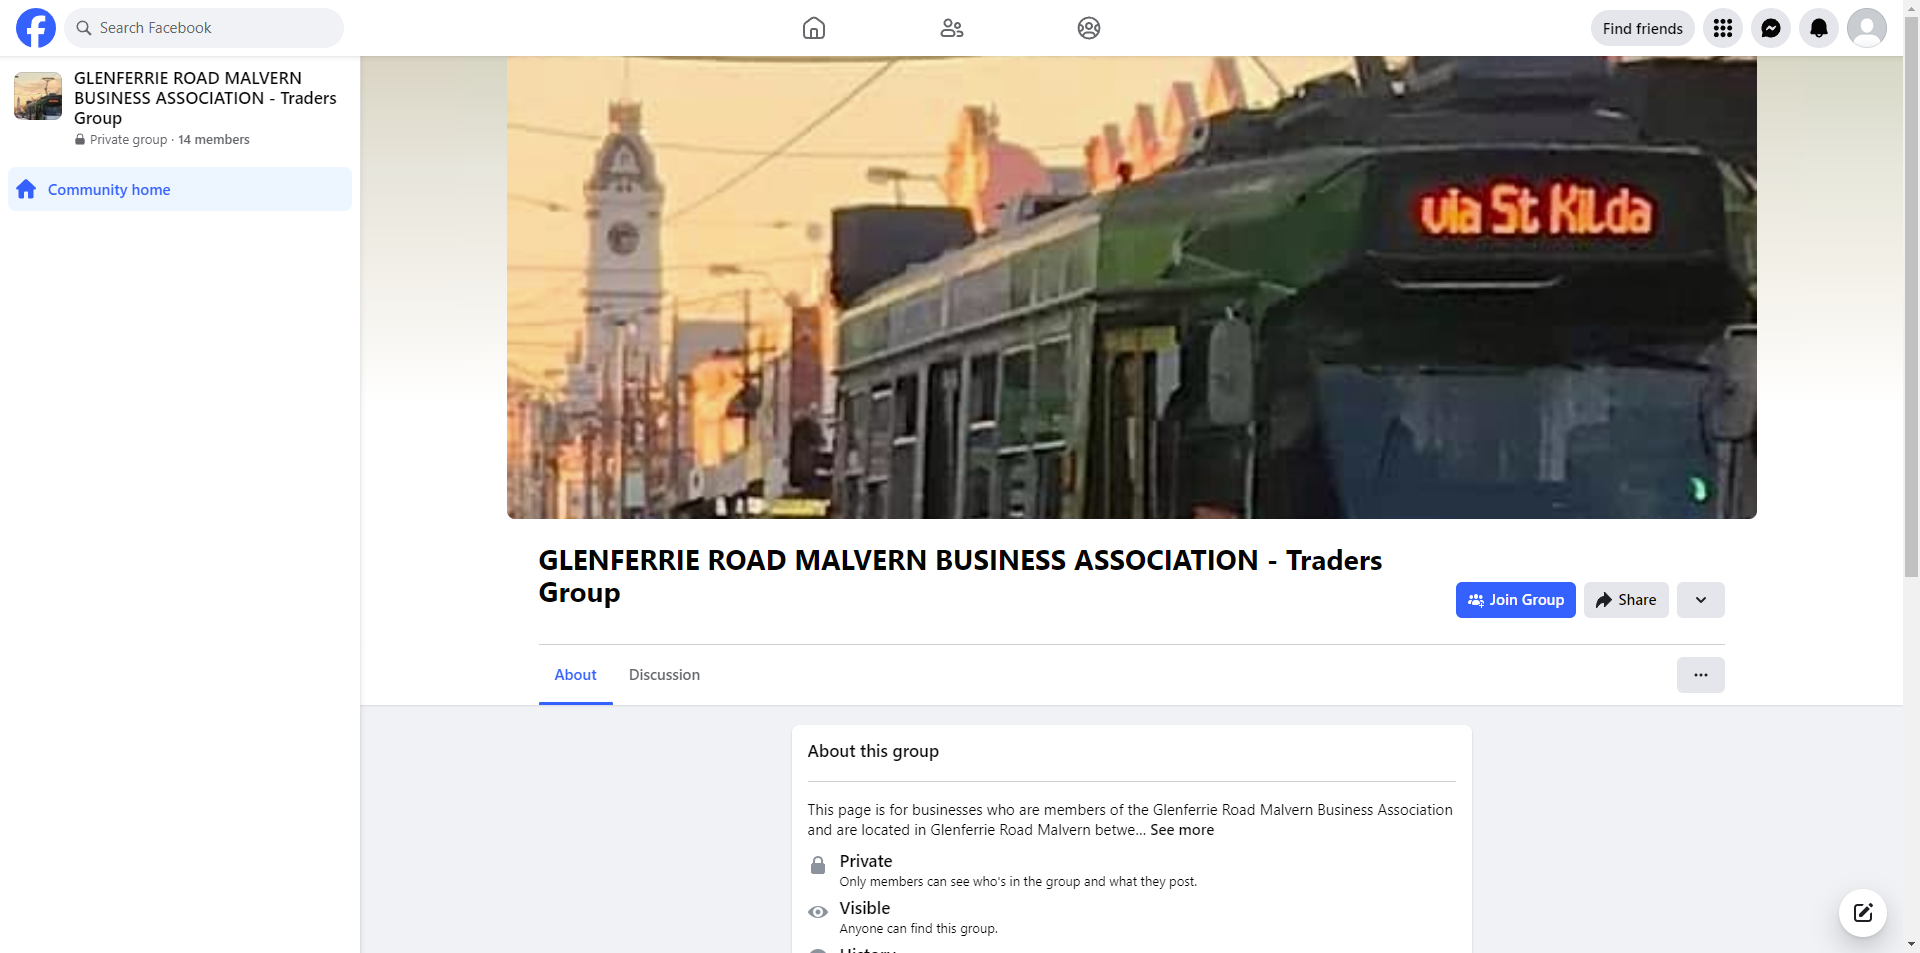 GLENFERRIE ROAD MALVERN BUSINESS ASSOCIATION - Traders Group